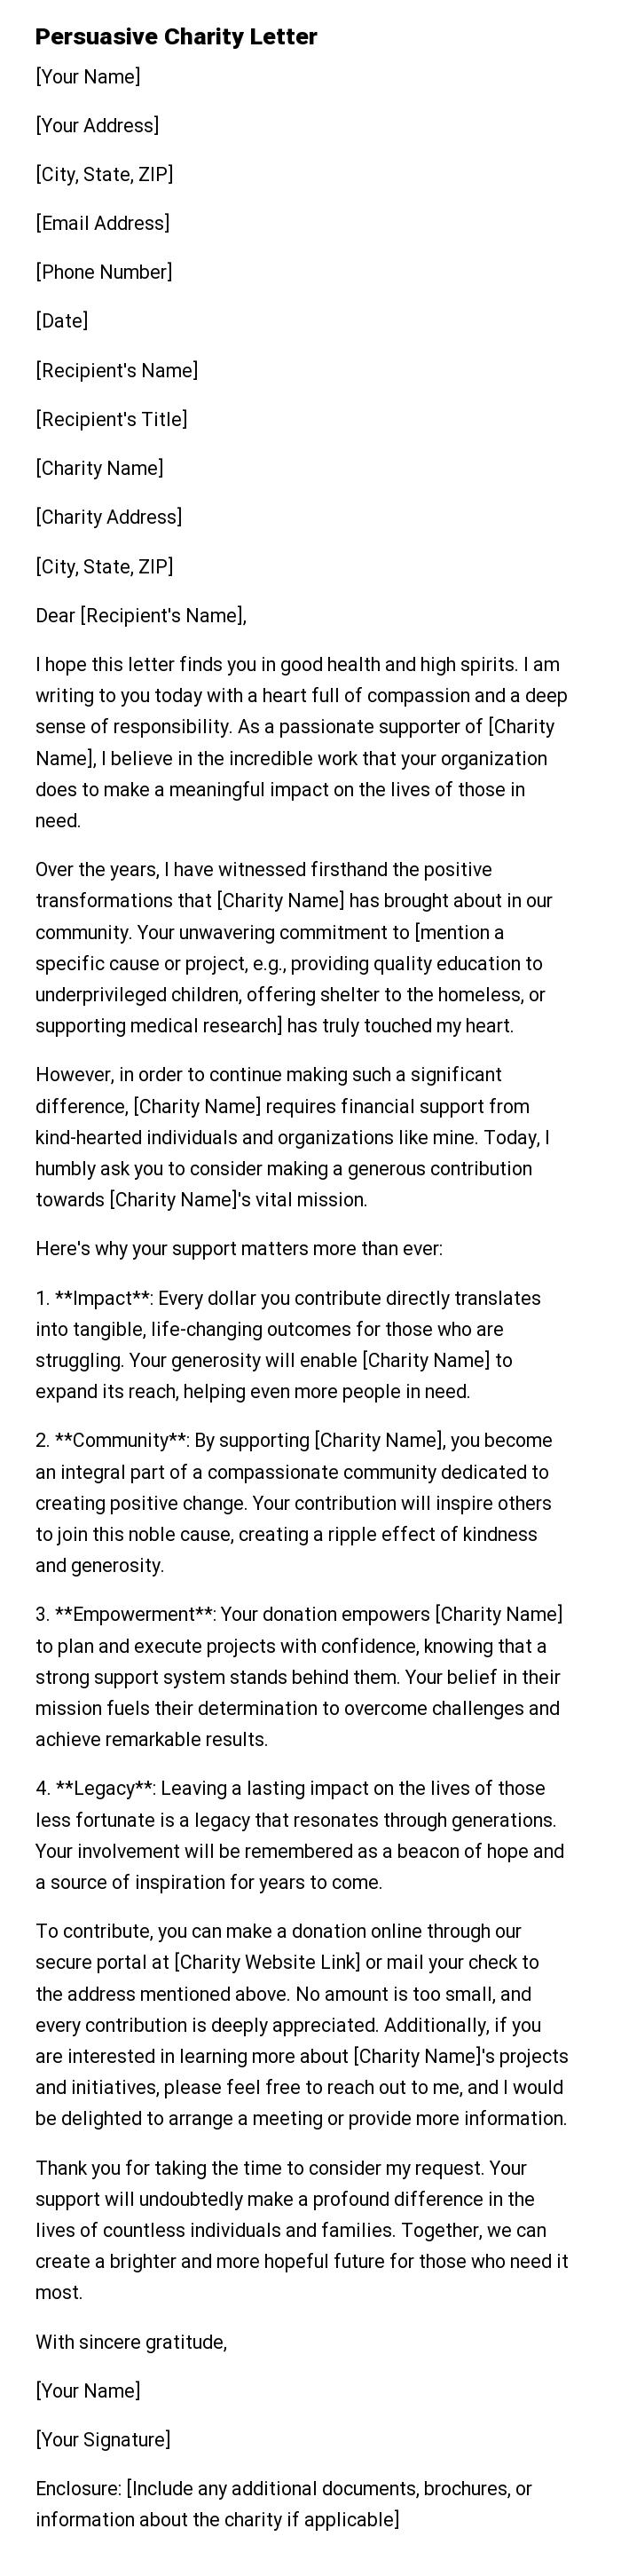 Persuasive Charity Letter